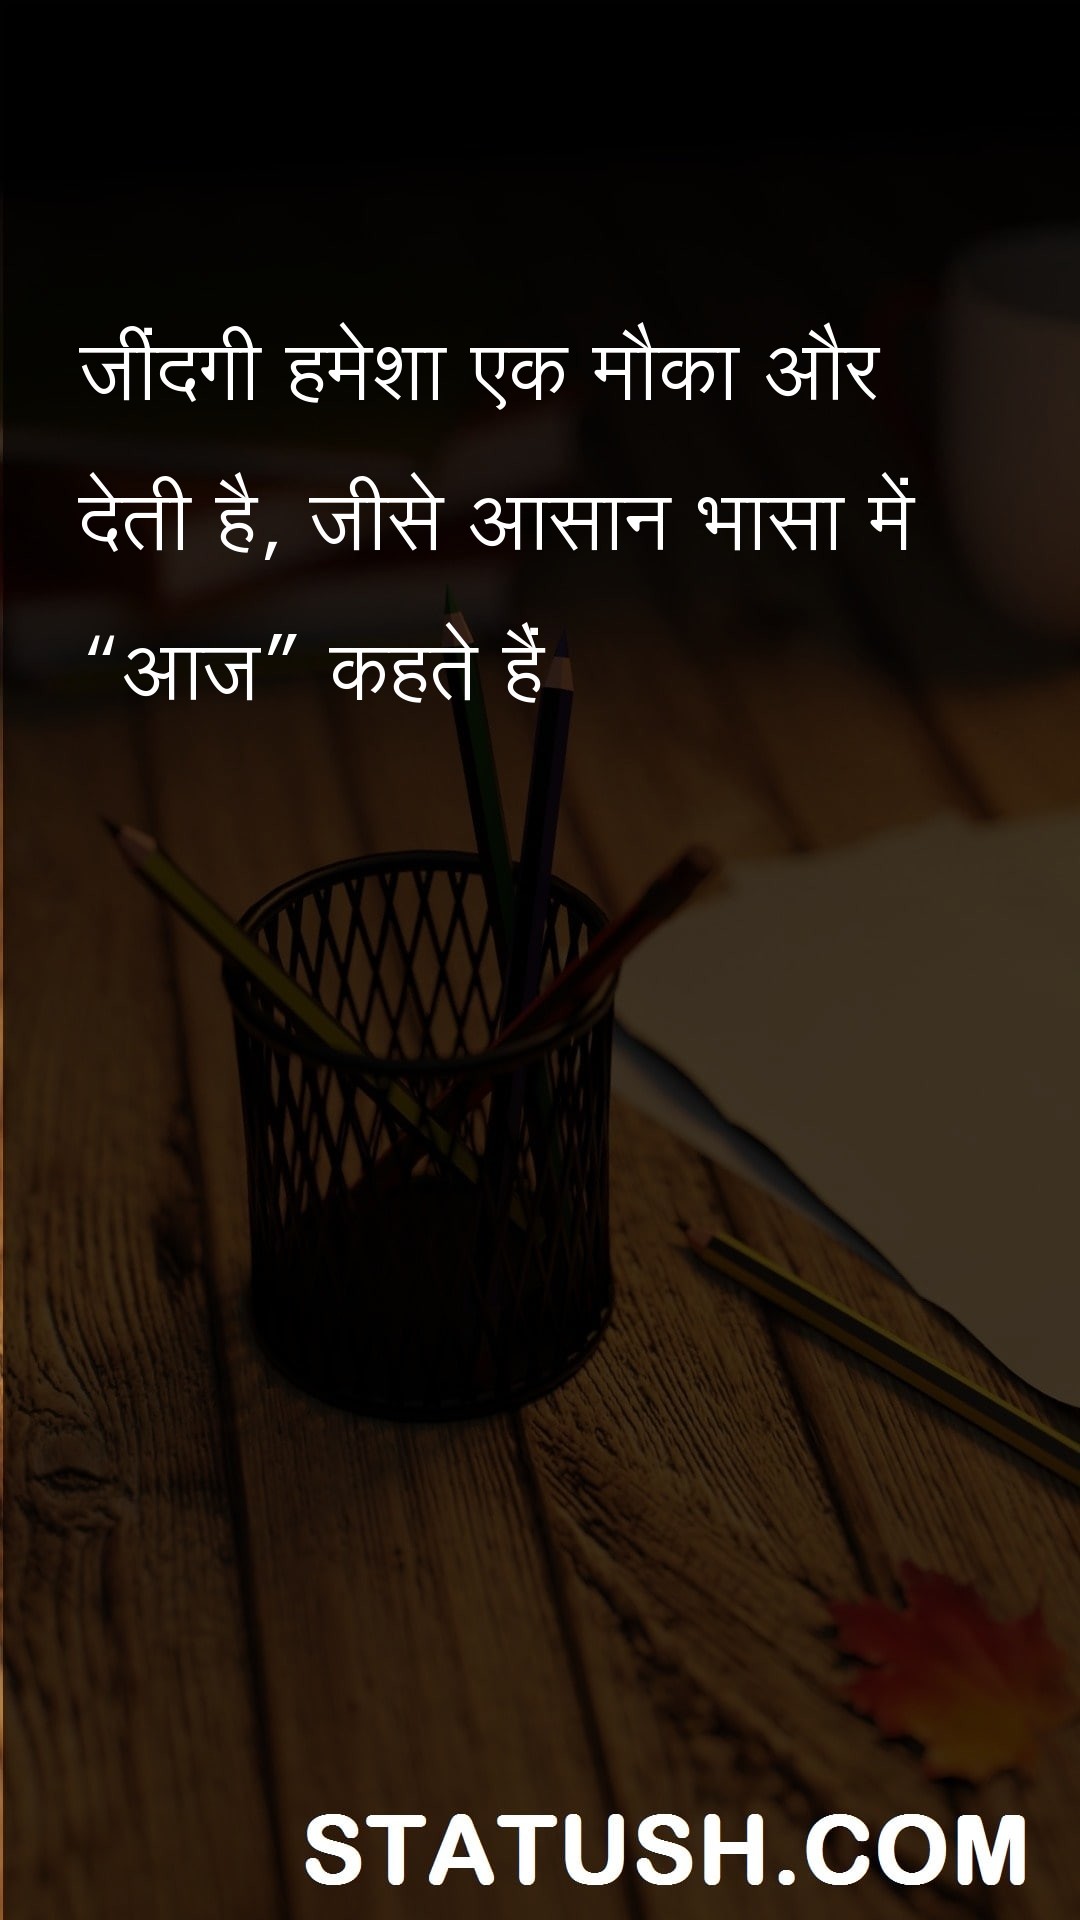 Life always gives another chance Hindi Quotes at statush.com